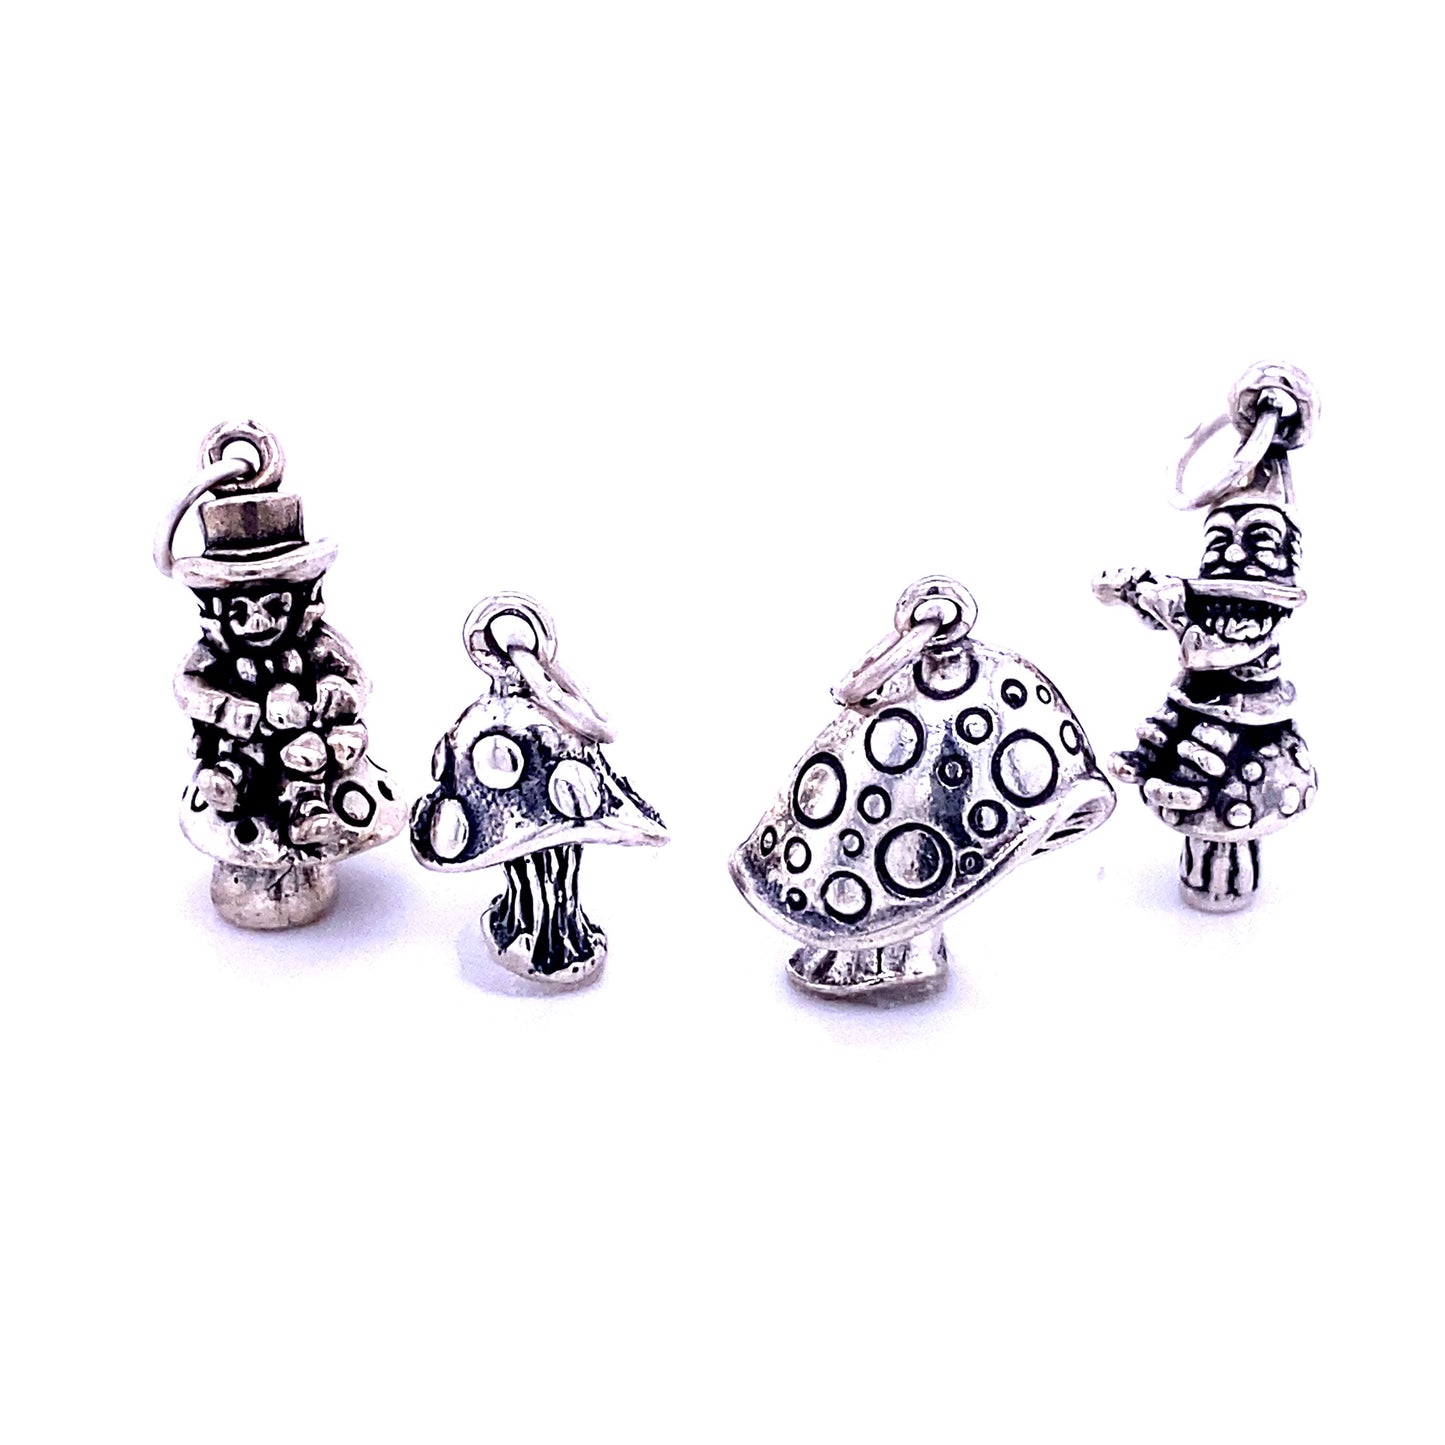 A collection of Mystical Mushroom Charms by Super Silver, including a small mushroom, arranged delicately on a clean white surface.